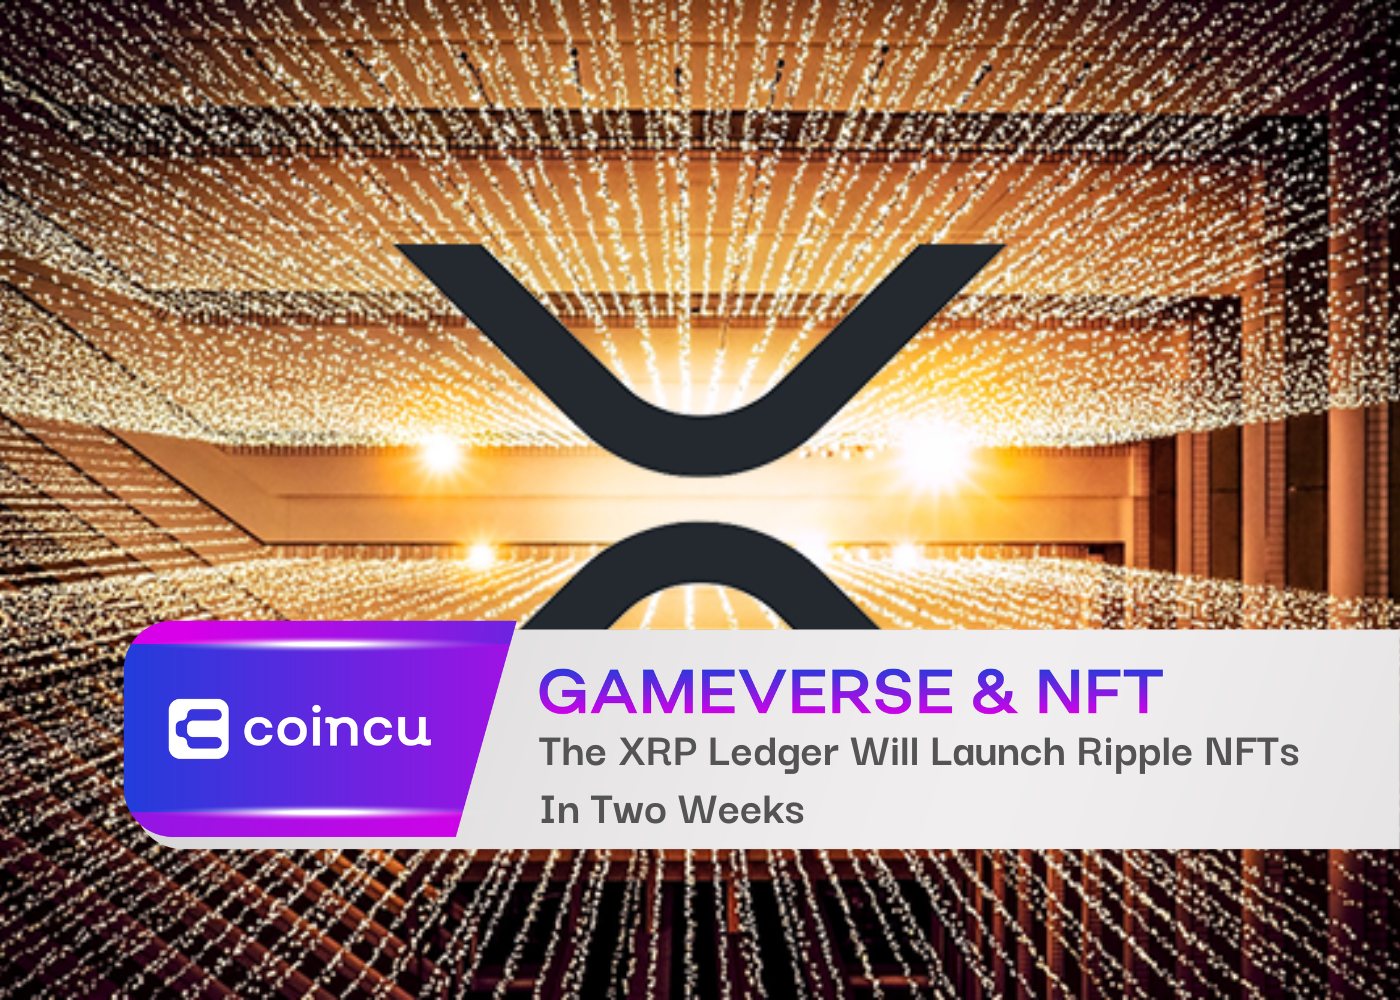 The XRP Ledger Will Launch Ripple NFTs